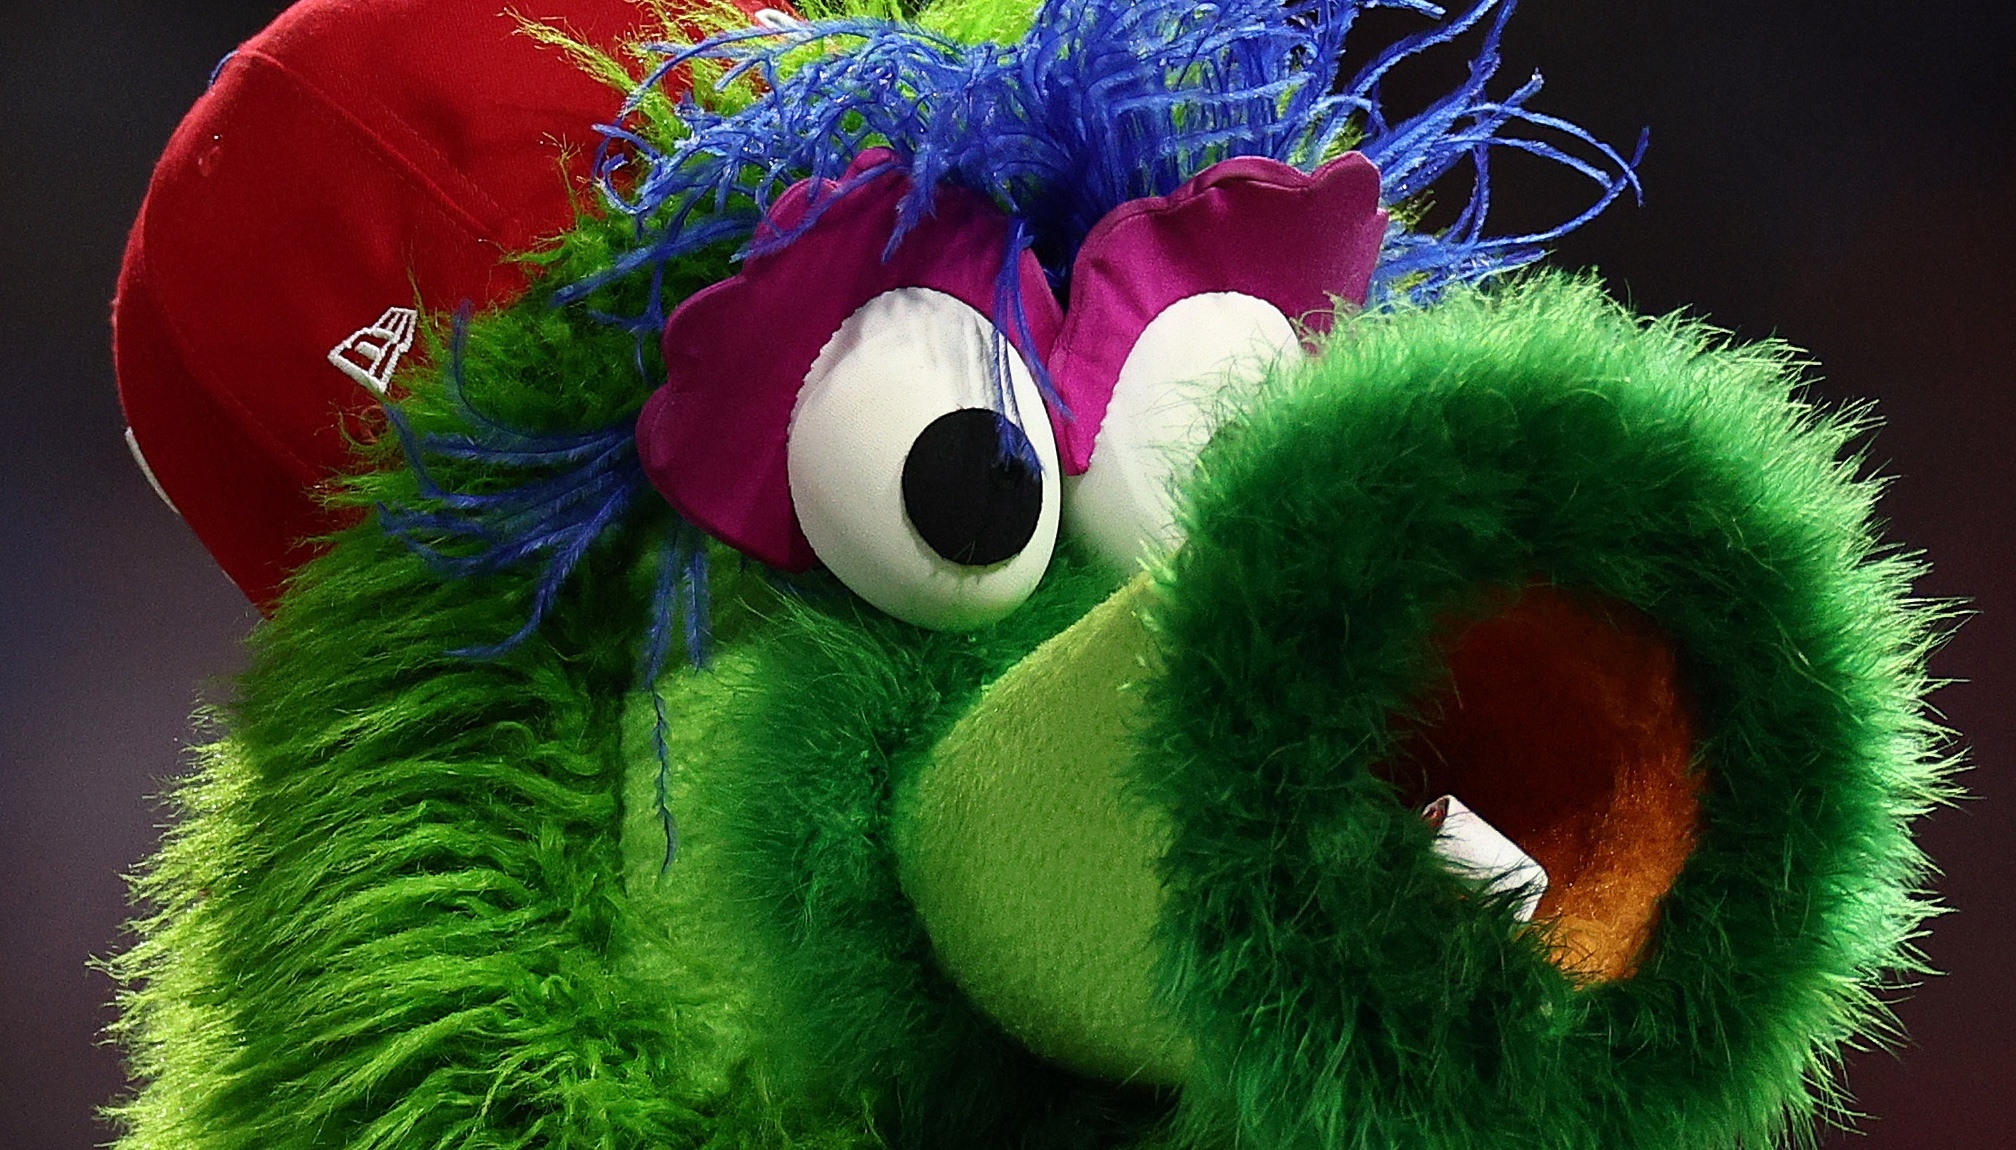 close up of the phanatic's face.